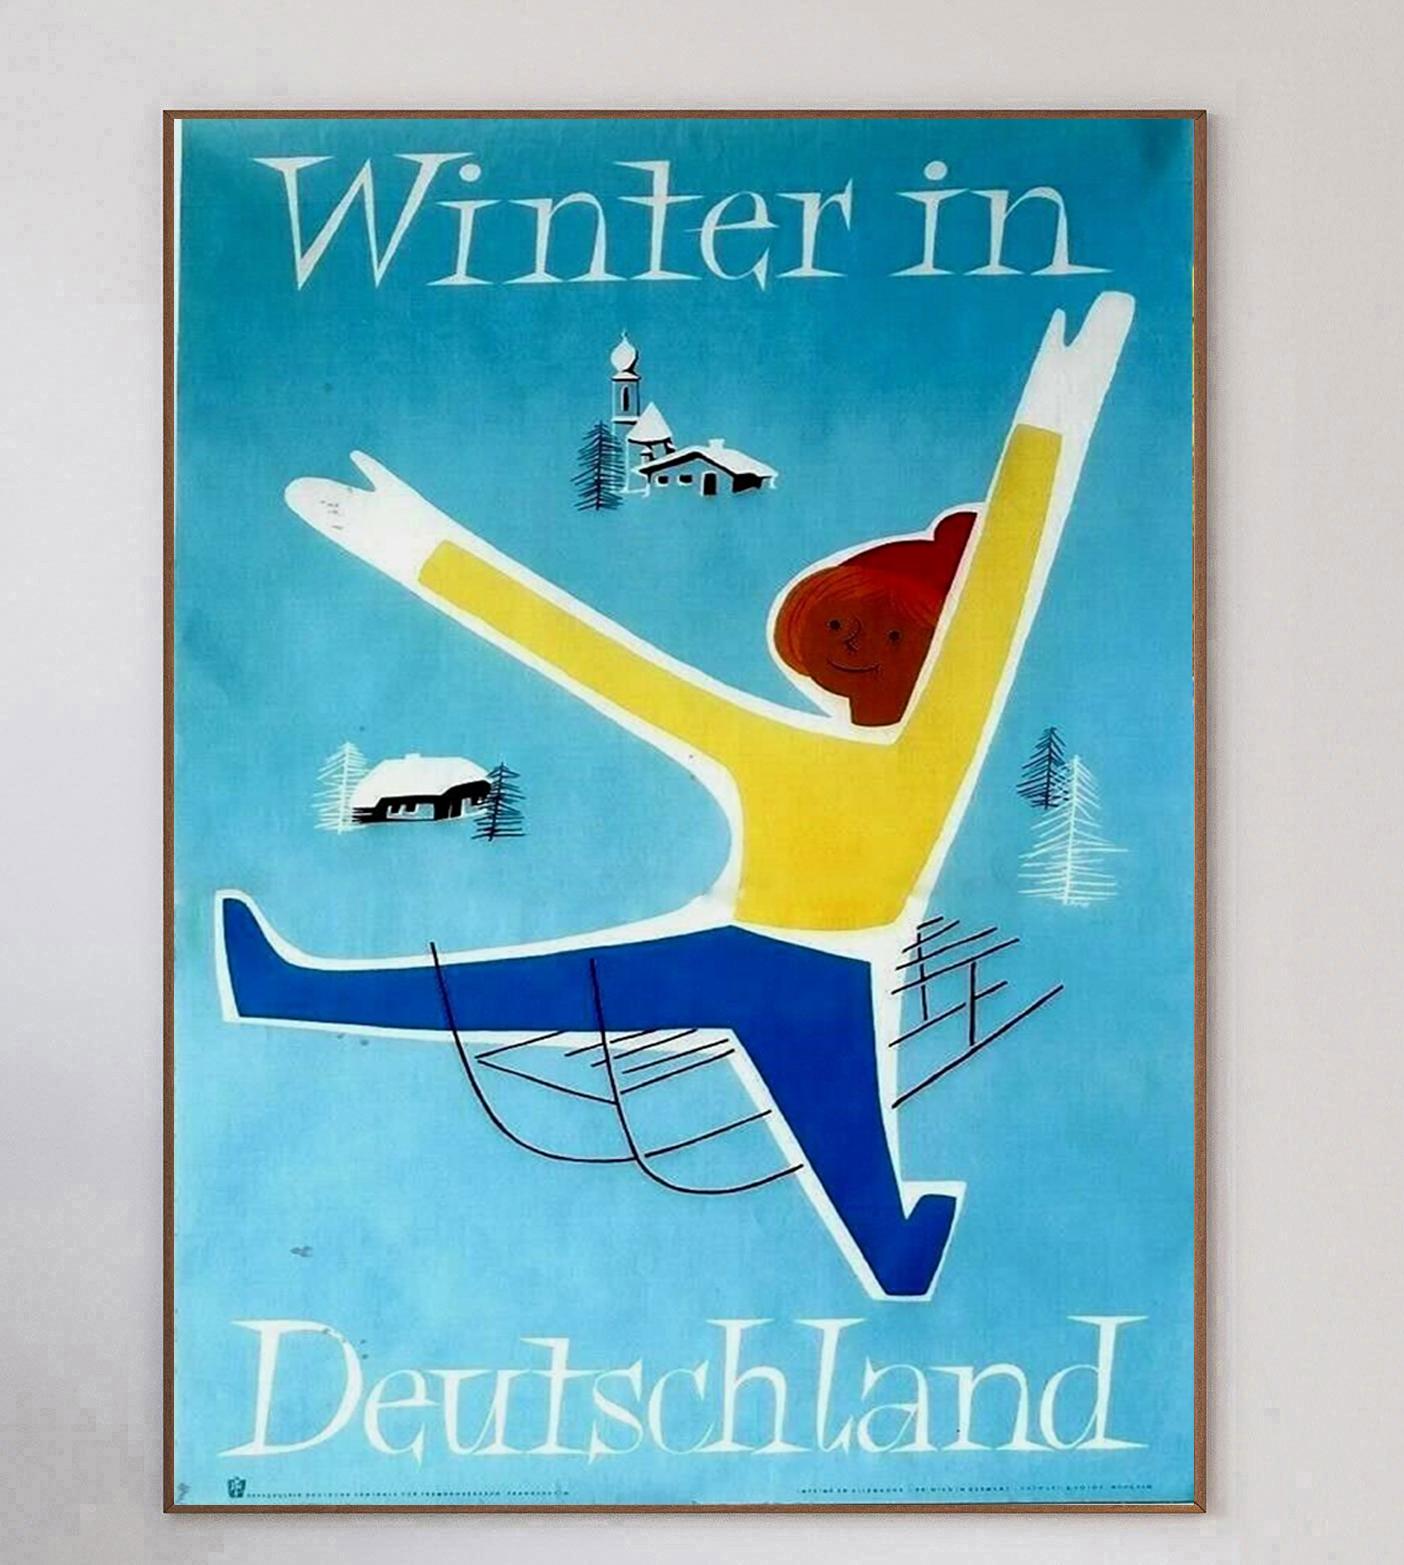 With charming artwork by G. Hotop depicting a person joyfully enjoying the snow on a sledge, this wonderful mid century modern poster was created to promote tourists and visitors to visit Germany. 

Produced in 1960 and reading 